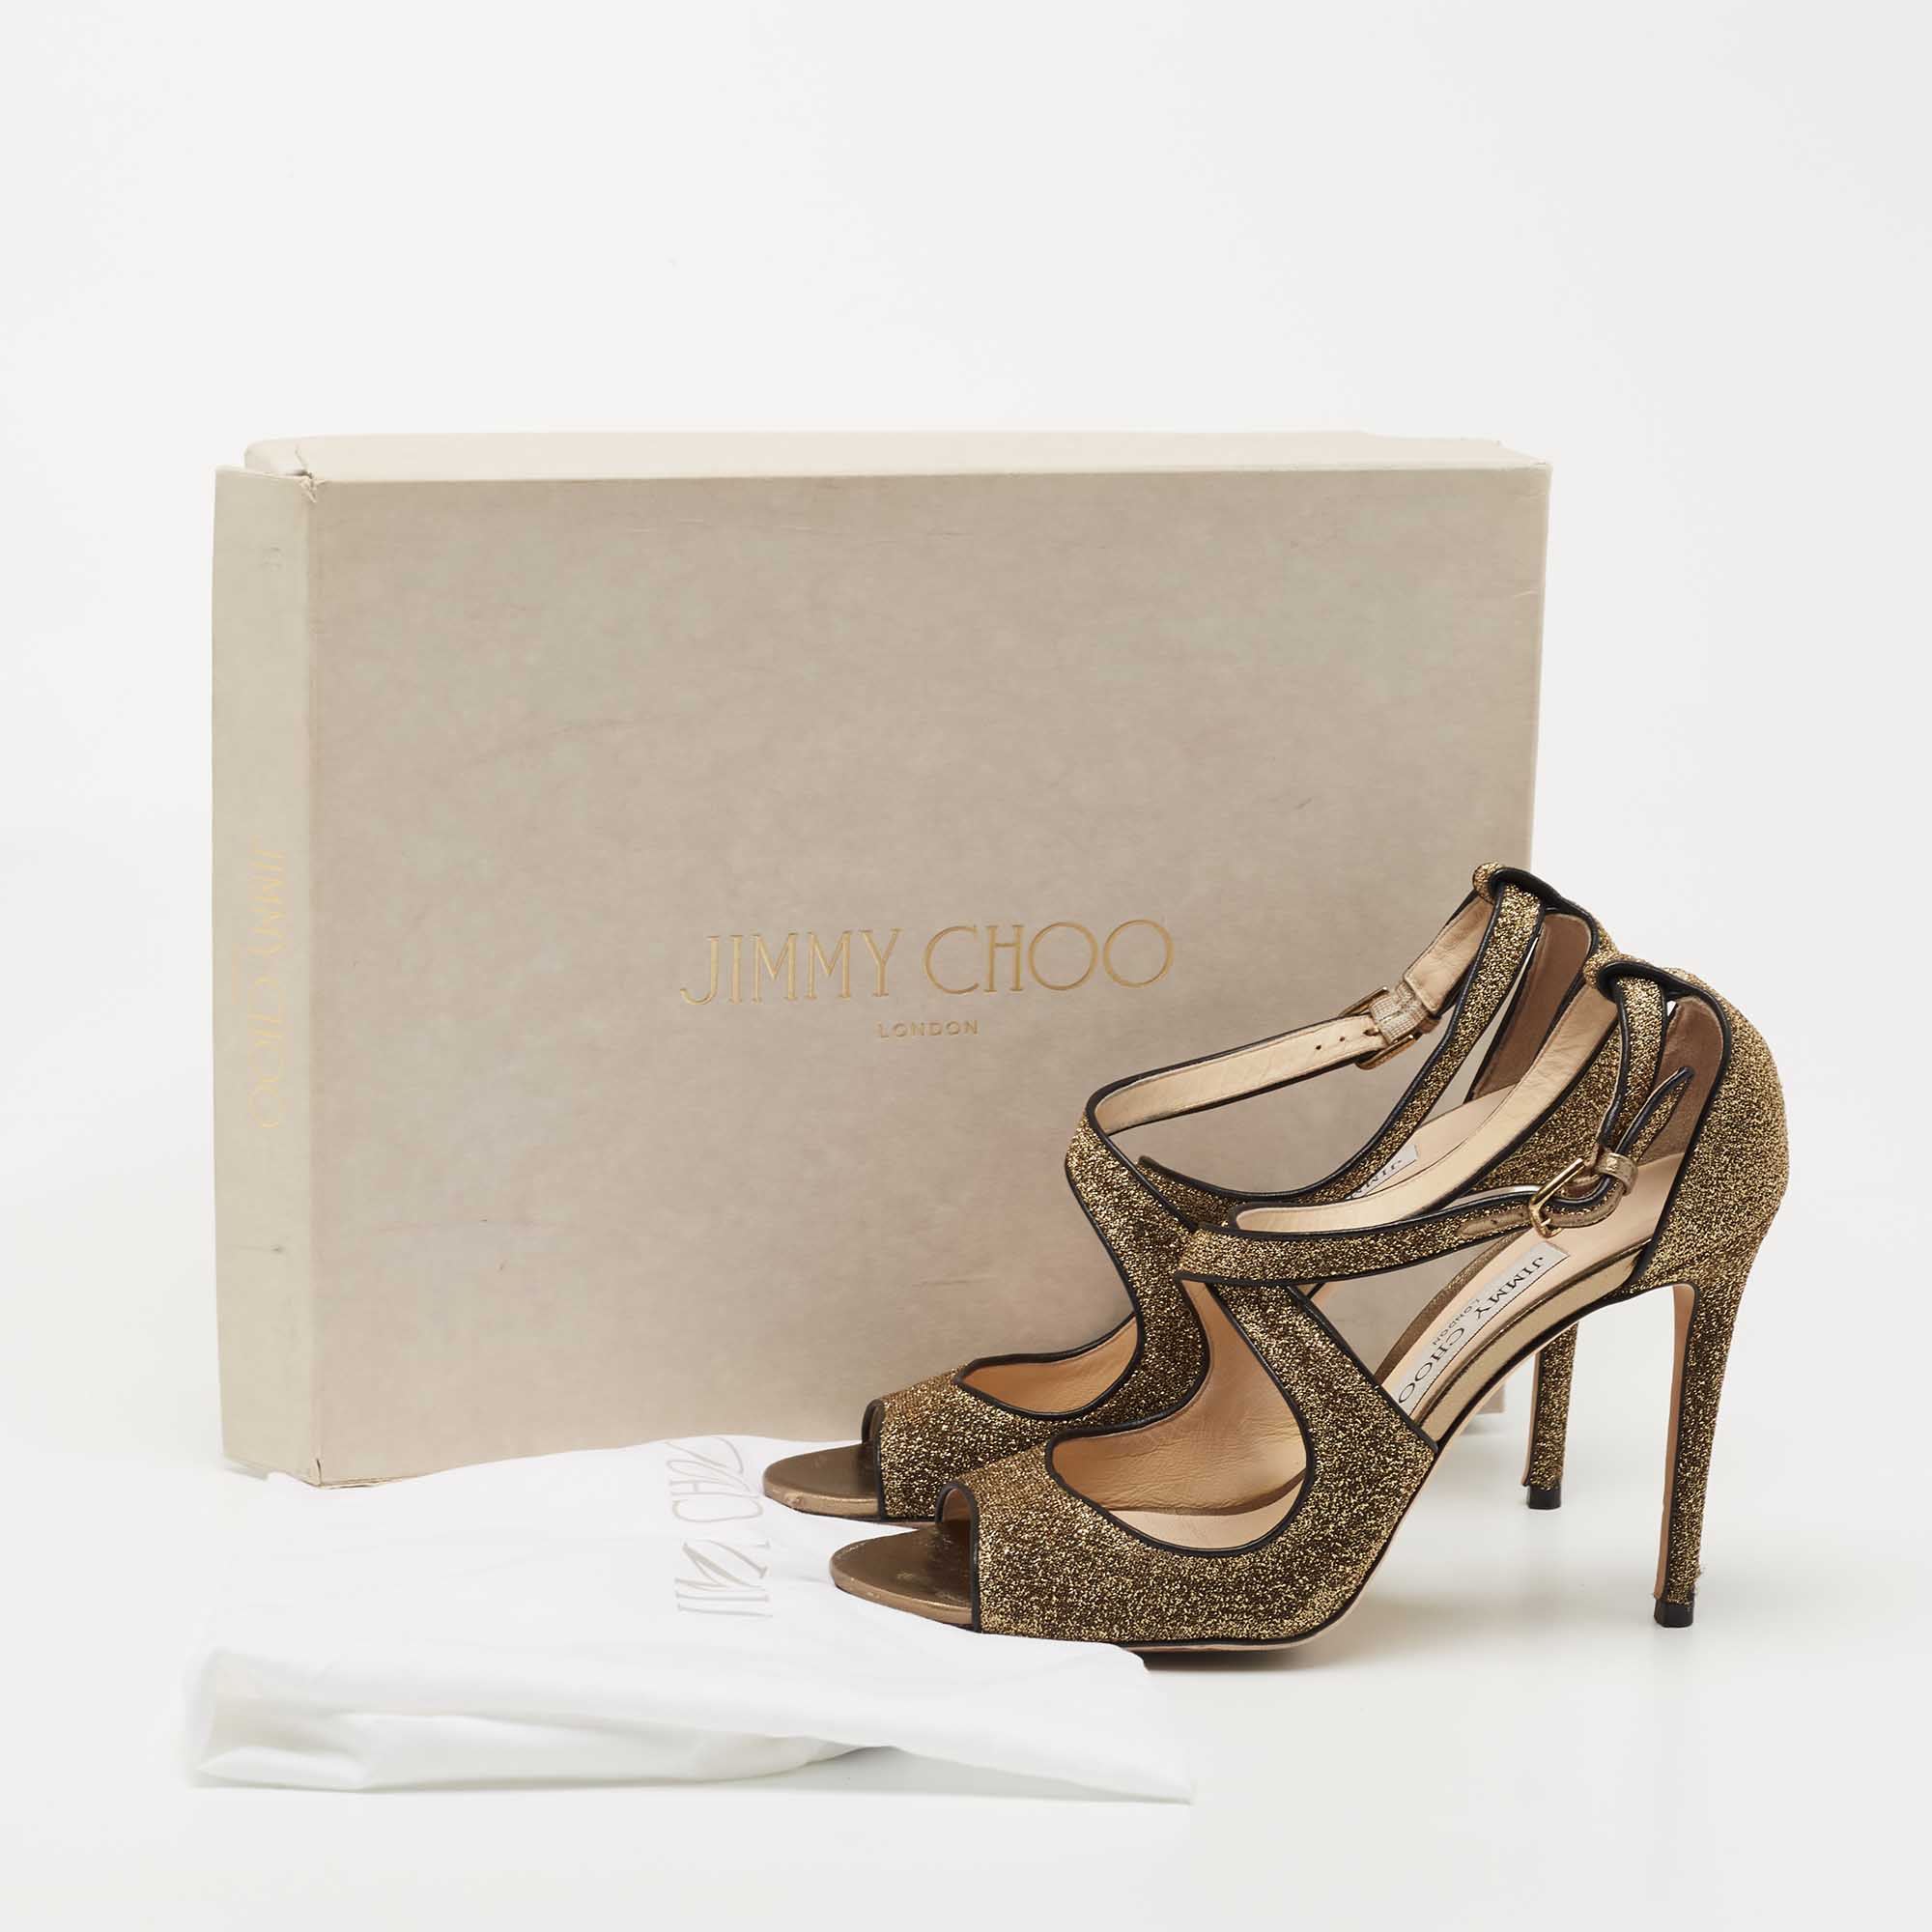 Jimmy Choo Metallic Gold Lurex Fabric And Leather Ankle Strap Sandals Size 38